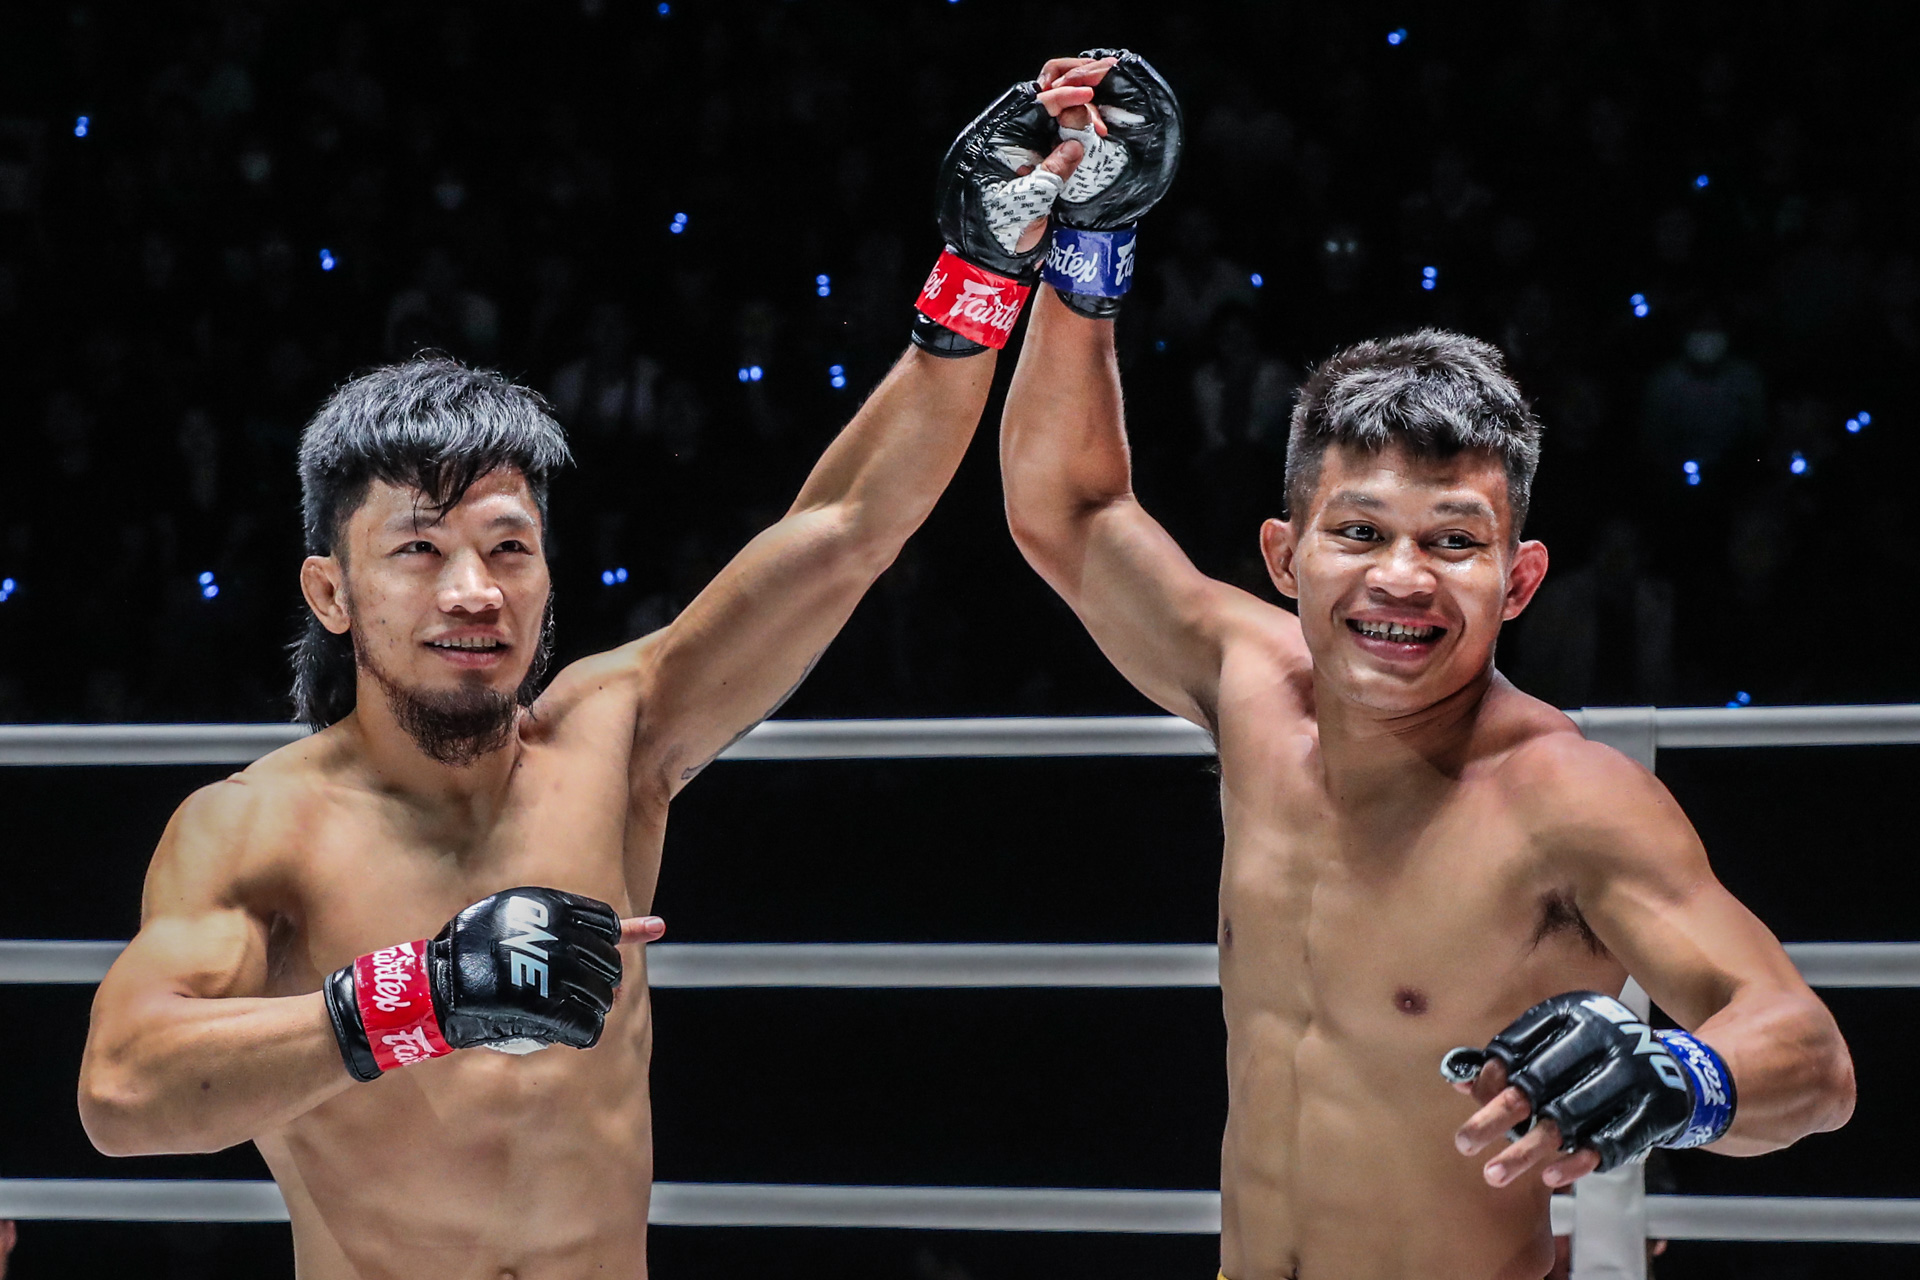 ONE-Friday-Fights-37-Lito-Adiwang-def-Matheis-2 Gone in 23 seconds: Lito Adiwang TKOs Indonesian foe in ONE return Mixed Martial Arts News ONE Championship  - philippine sports news